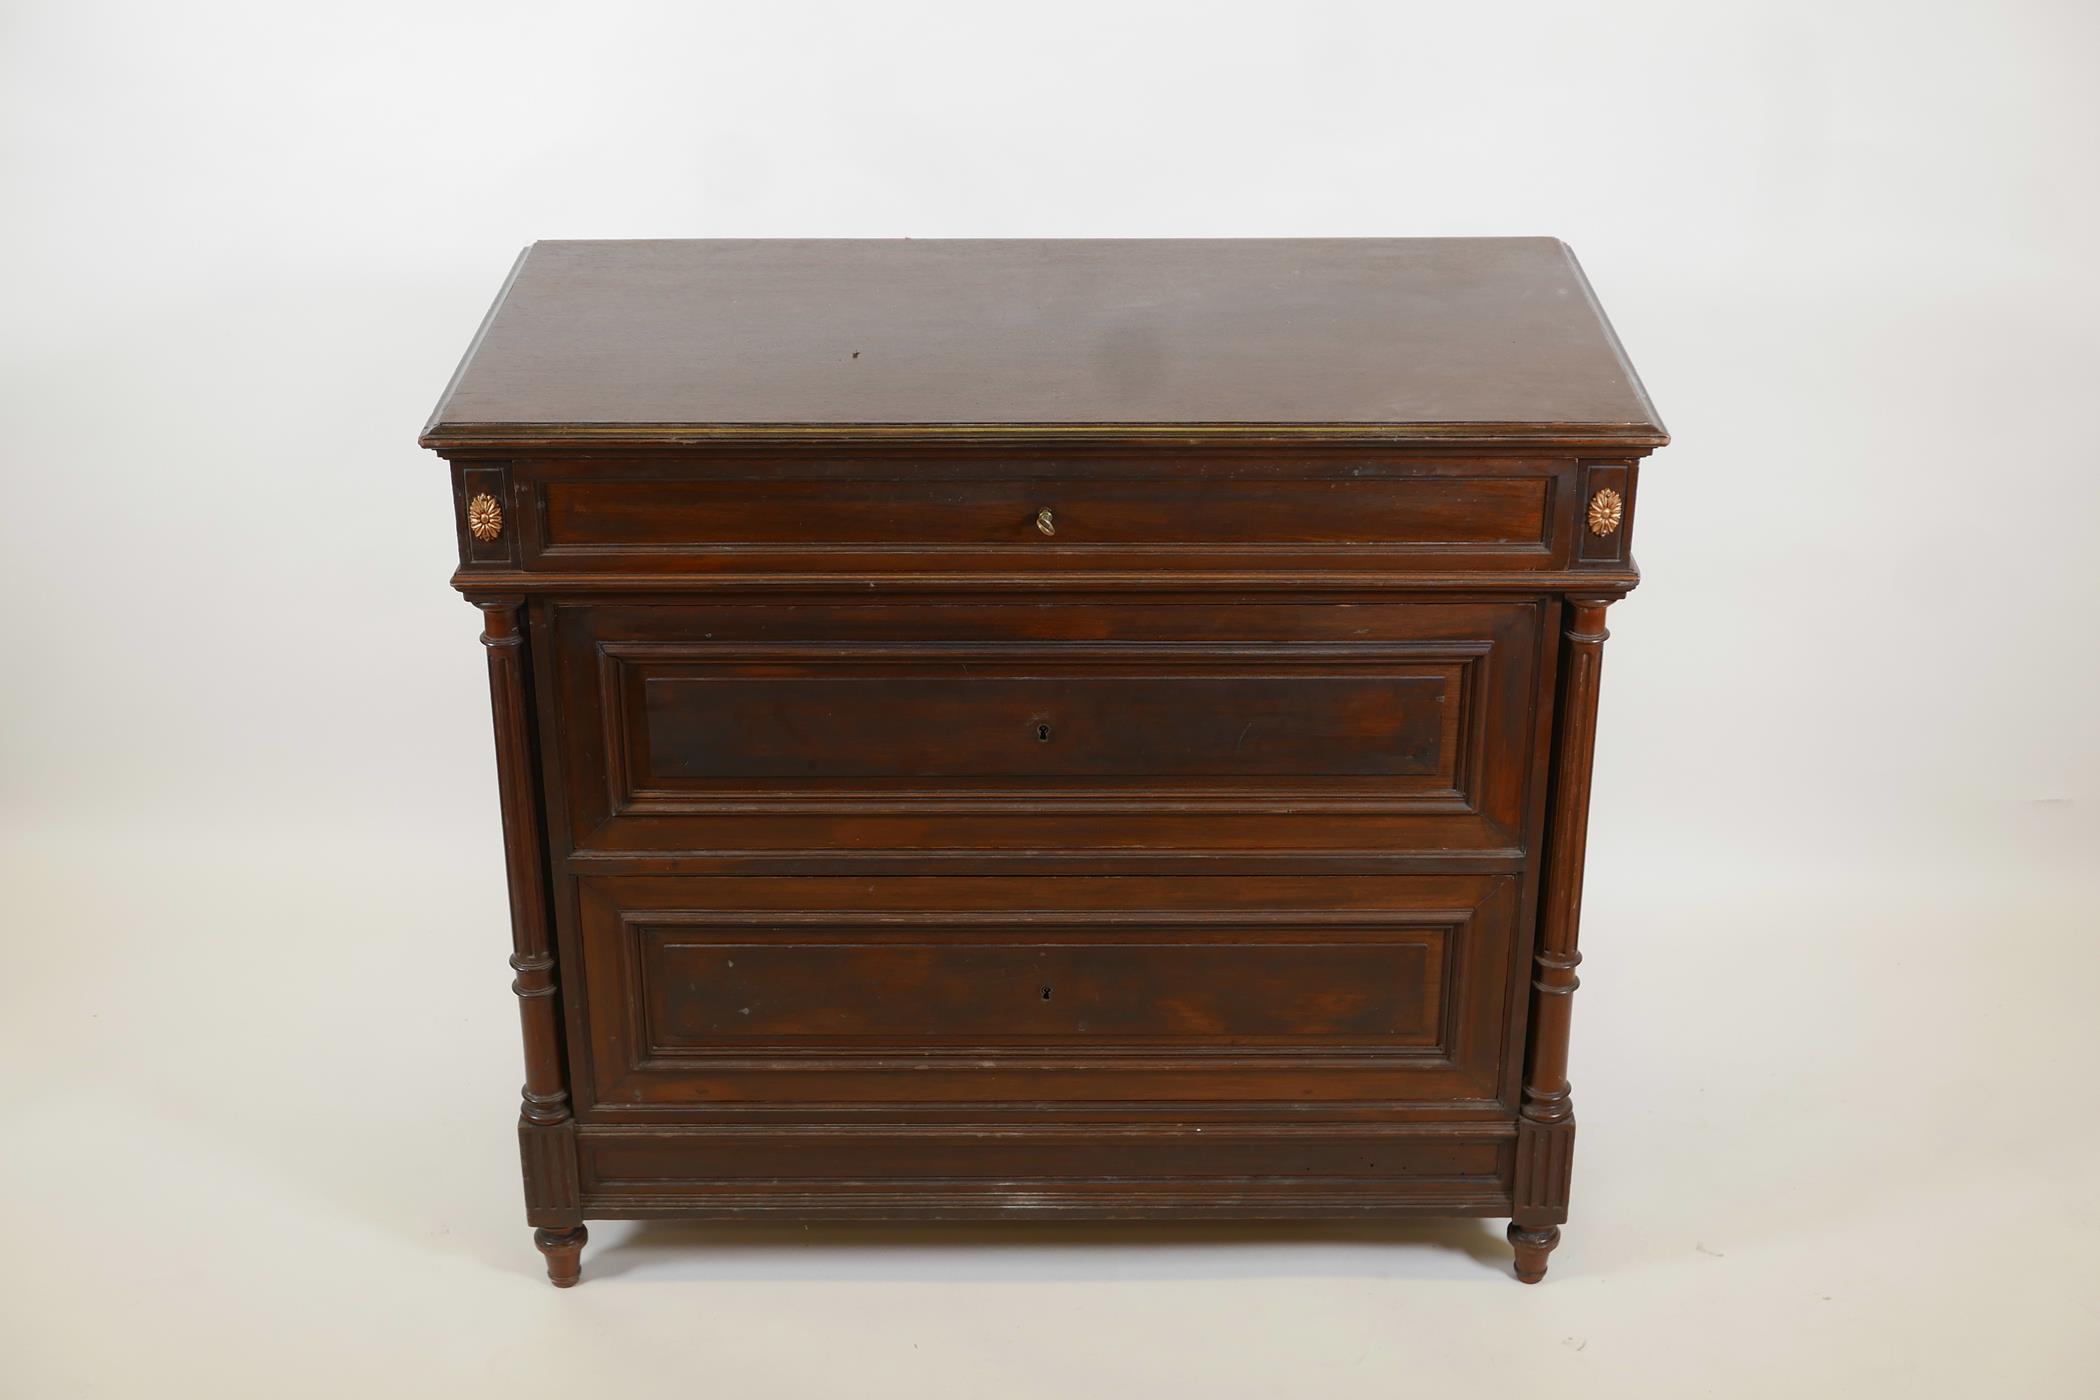 A C19th French mahogany commode with three moulded front drawers flanked by fluted columns, raised - Image 2 of 2